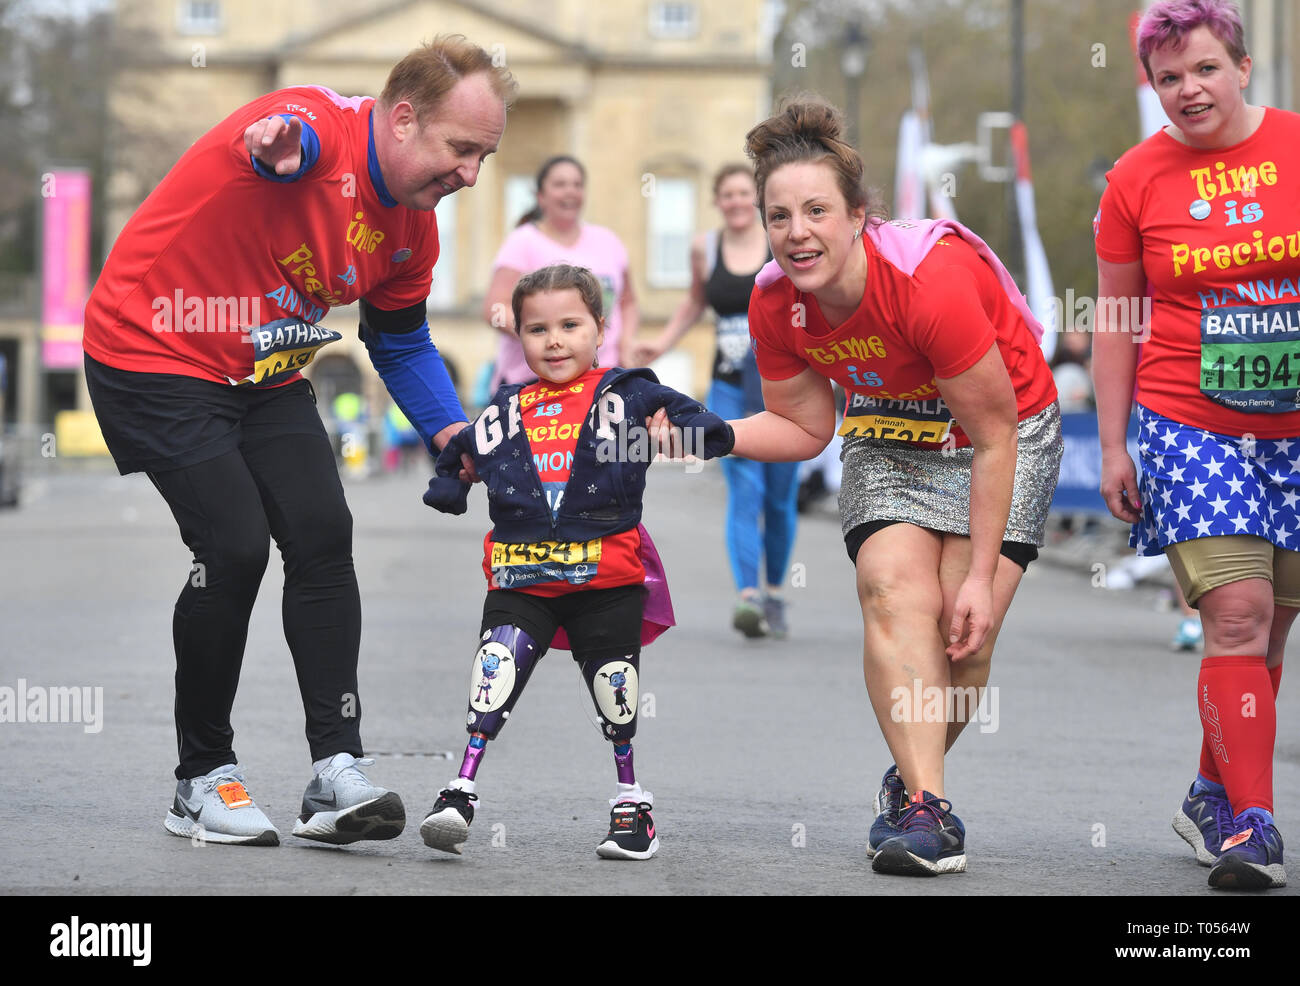 Five-year-old Harmonie-Rose Allen, who lost her limbs to meningitis, crossing the finishing line in the Bath Half Marathon with the help of her teacher Antony Wainer and her auntie Hannah Hall. Stock Photo